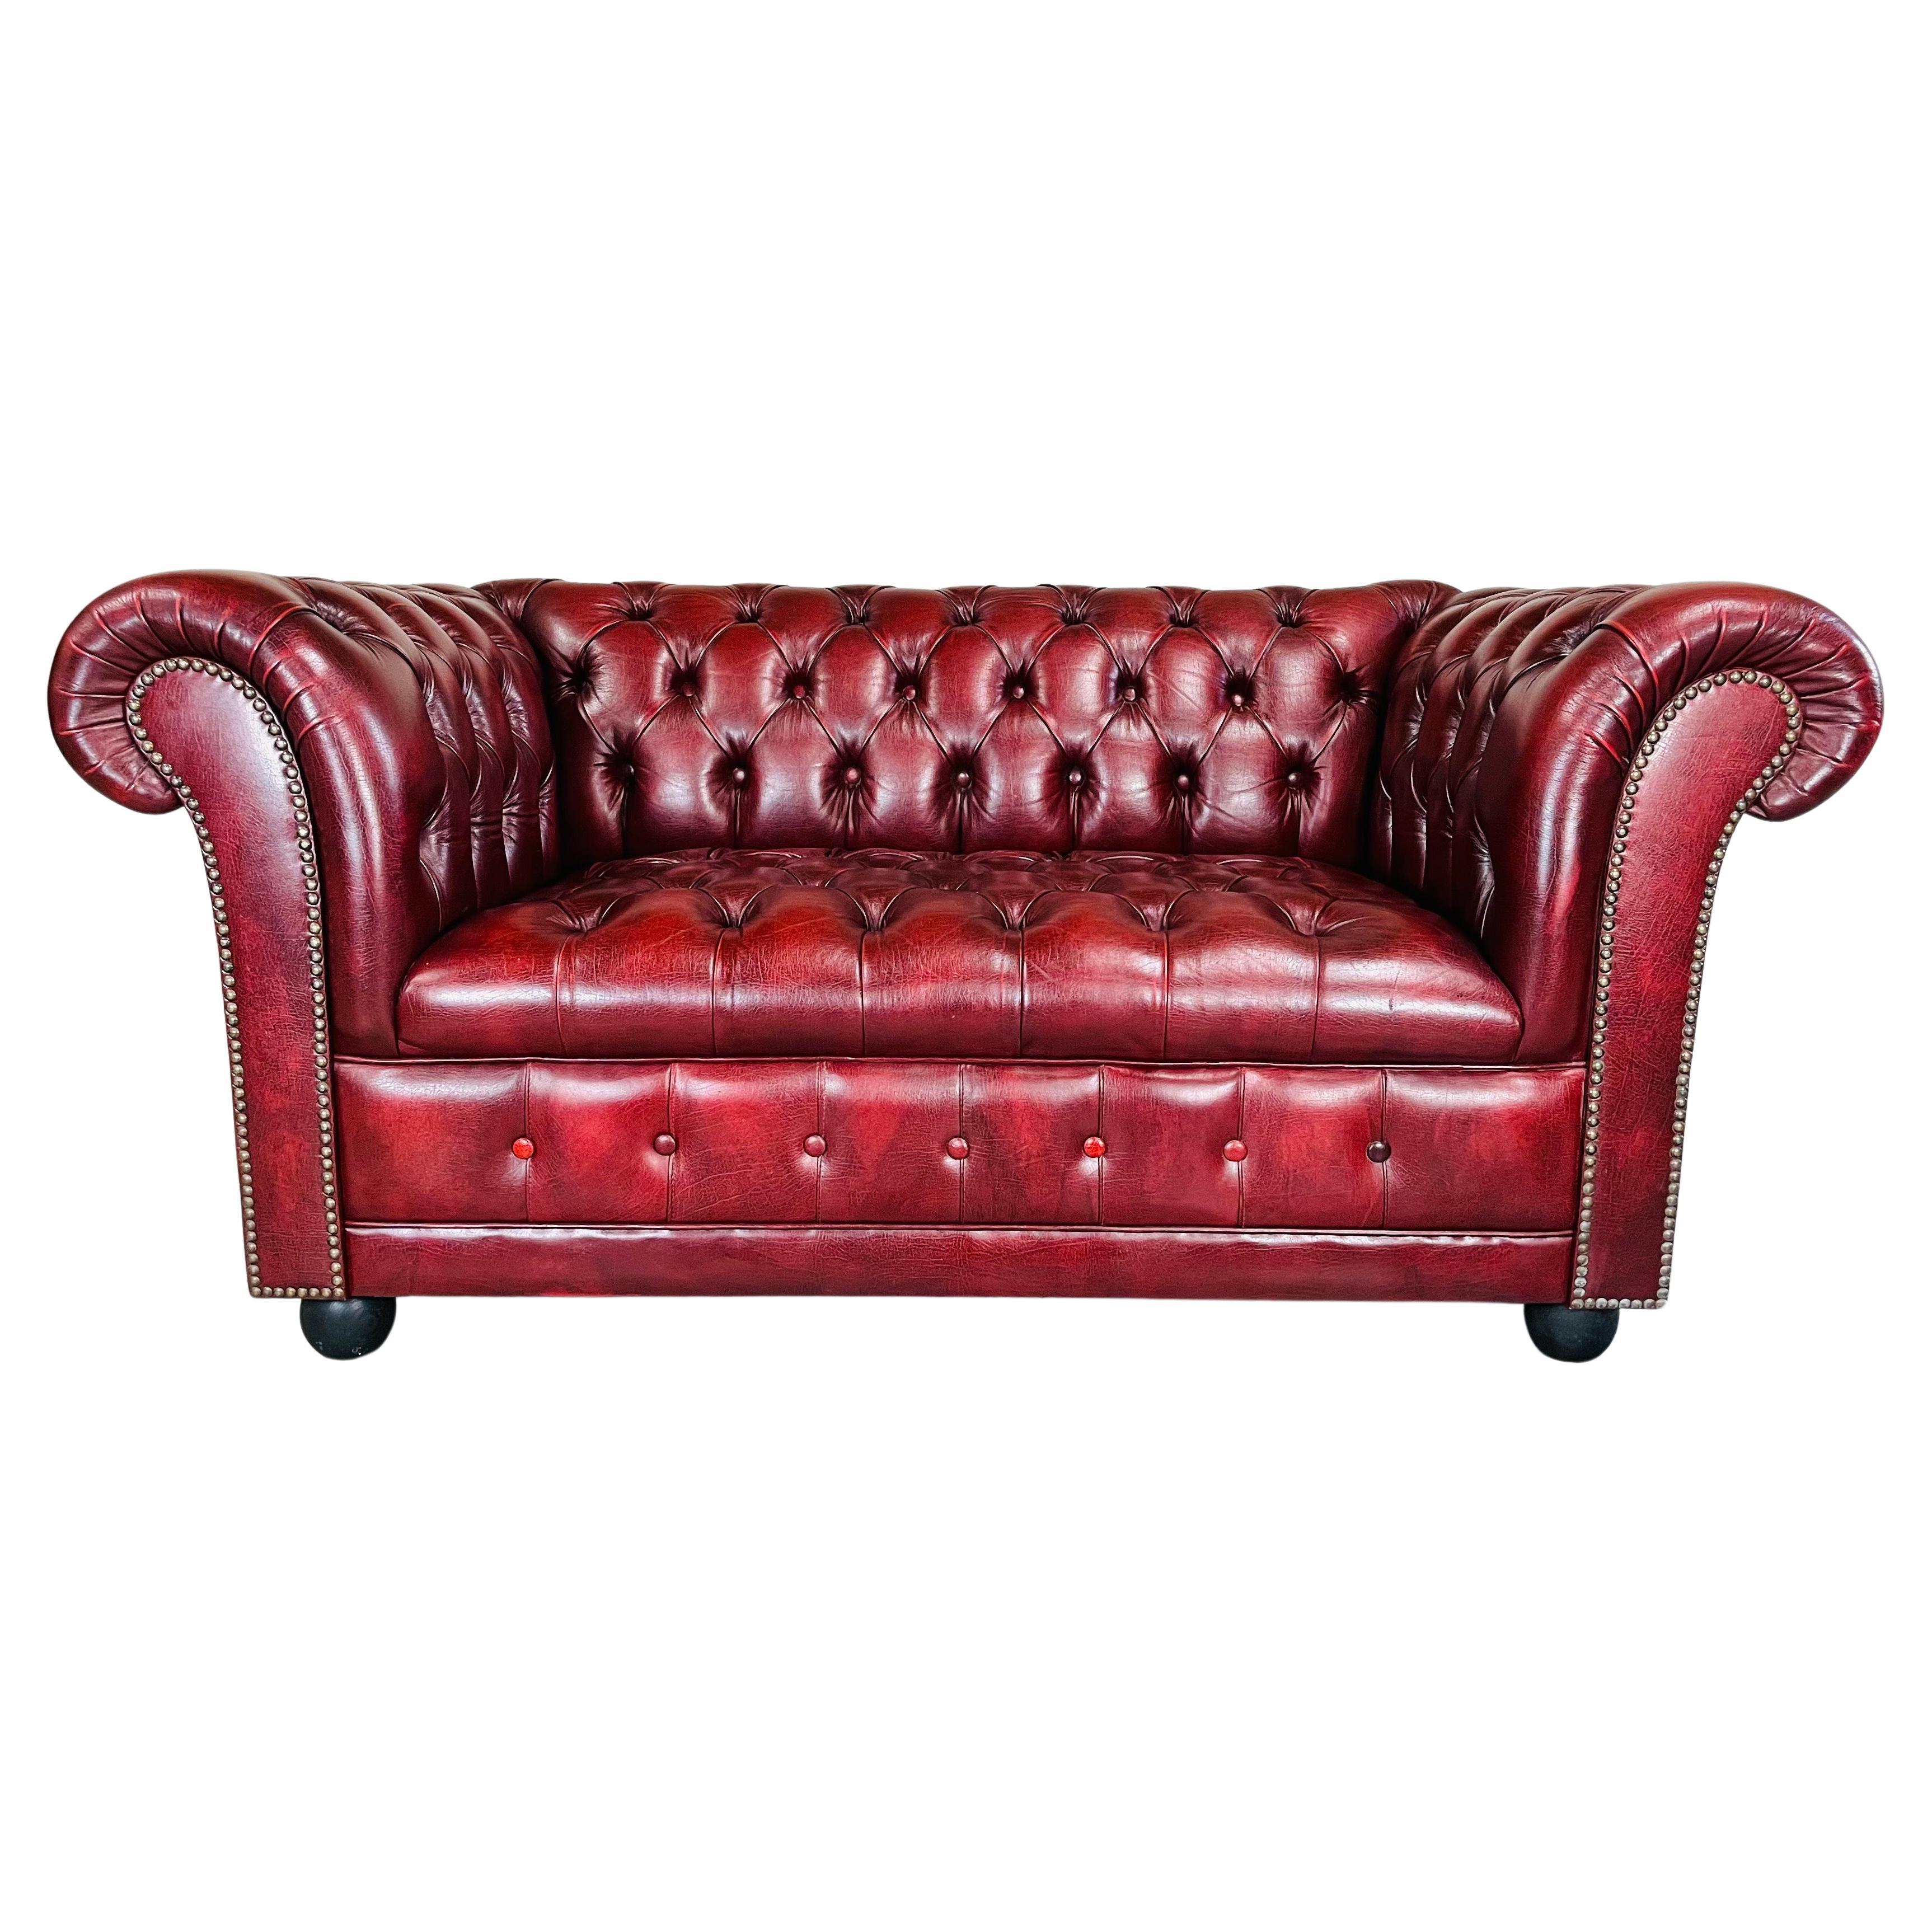 Oxblood Chesterfield Tufted Leather Love Seat Sofa -Great Britain Circa 1970